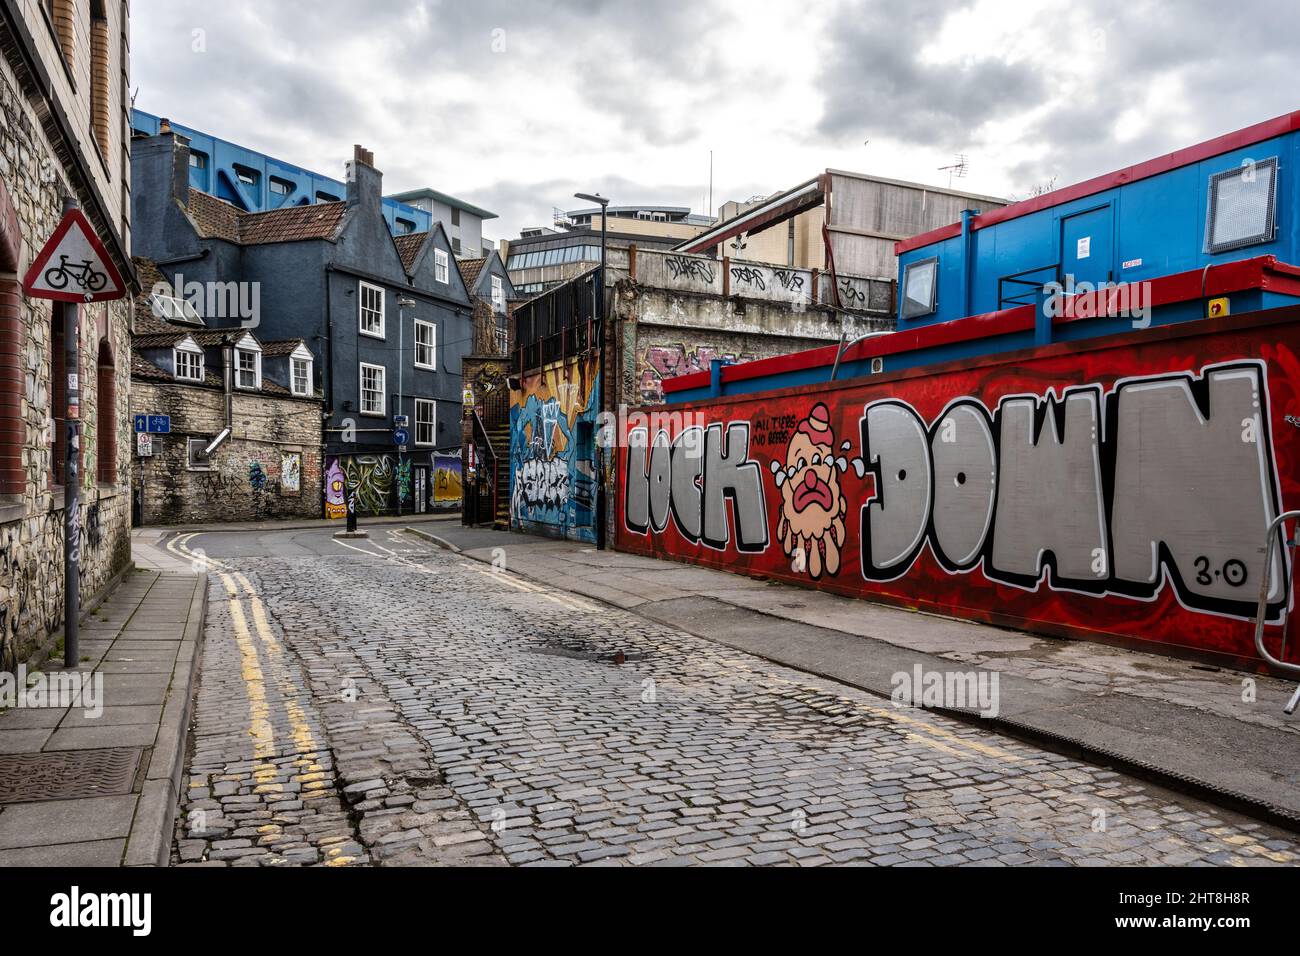 Graffiti covers old buildings and derelict sites on Moon Street in the Stokes Croft neighbourhood of Bristol. Stock Photo